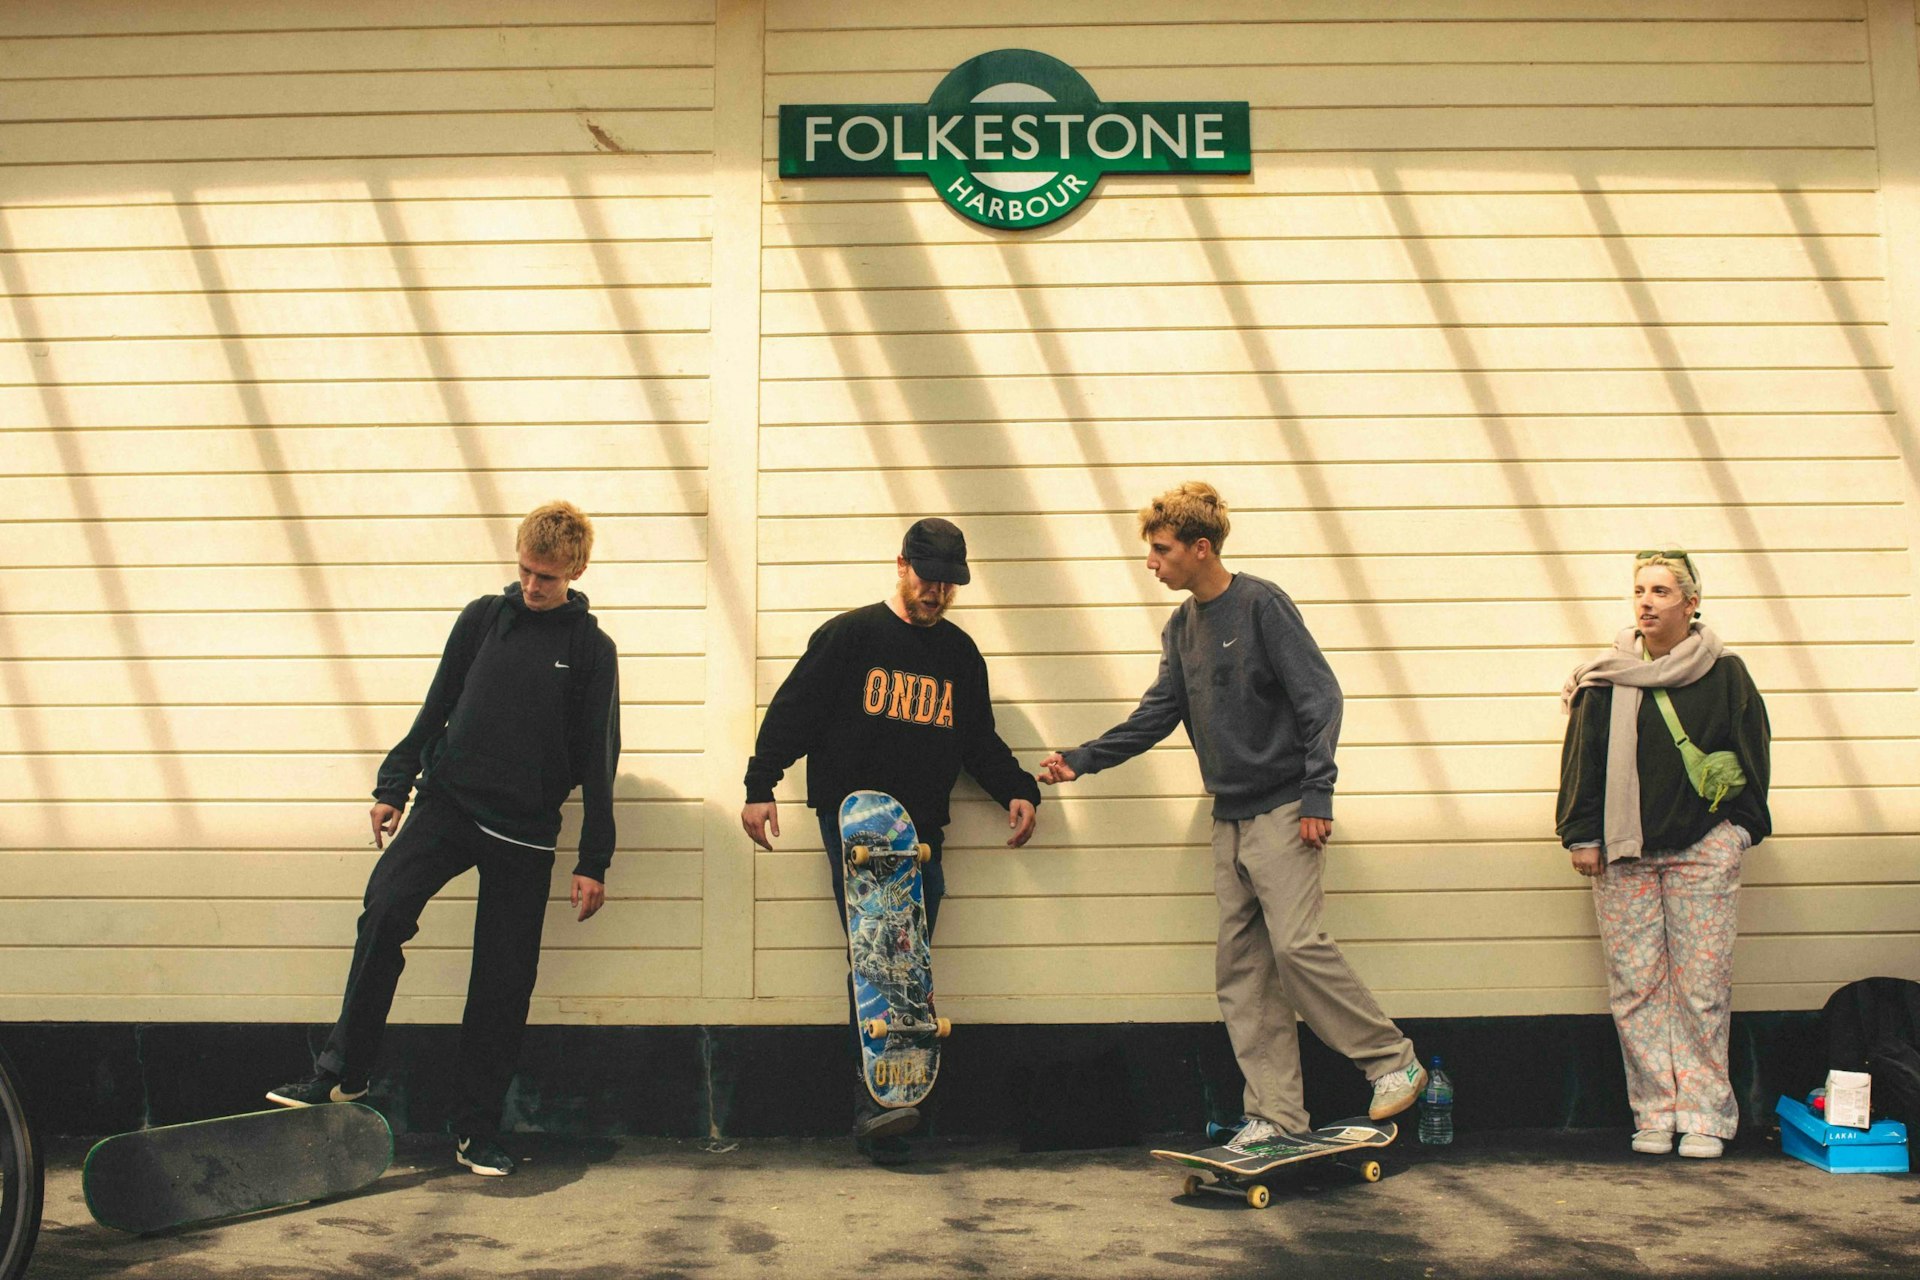 Folkestone is changing – and its skateboarders aren’t happy